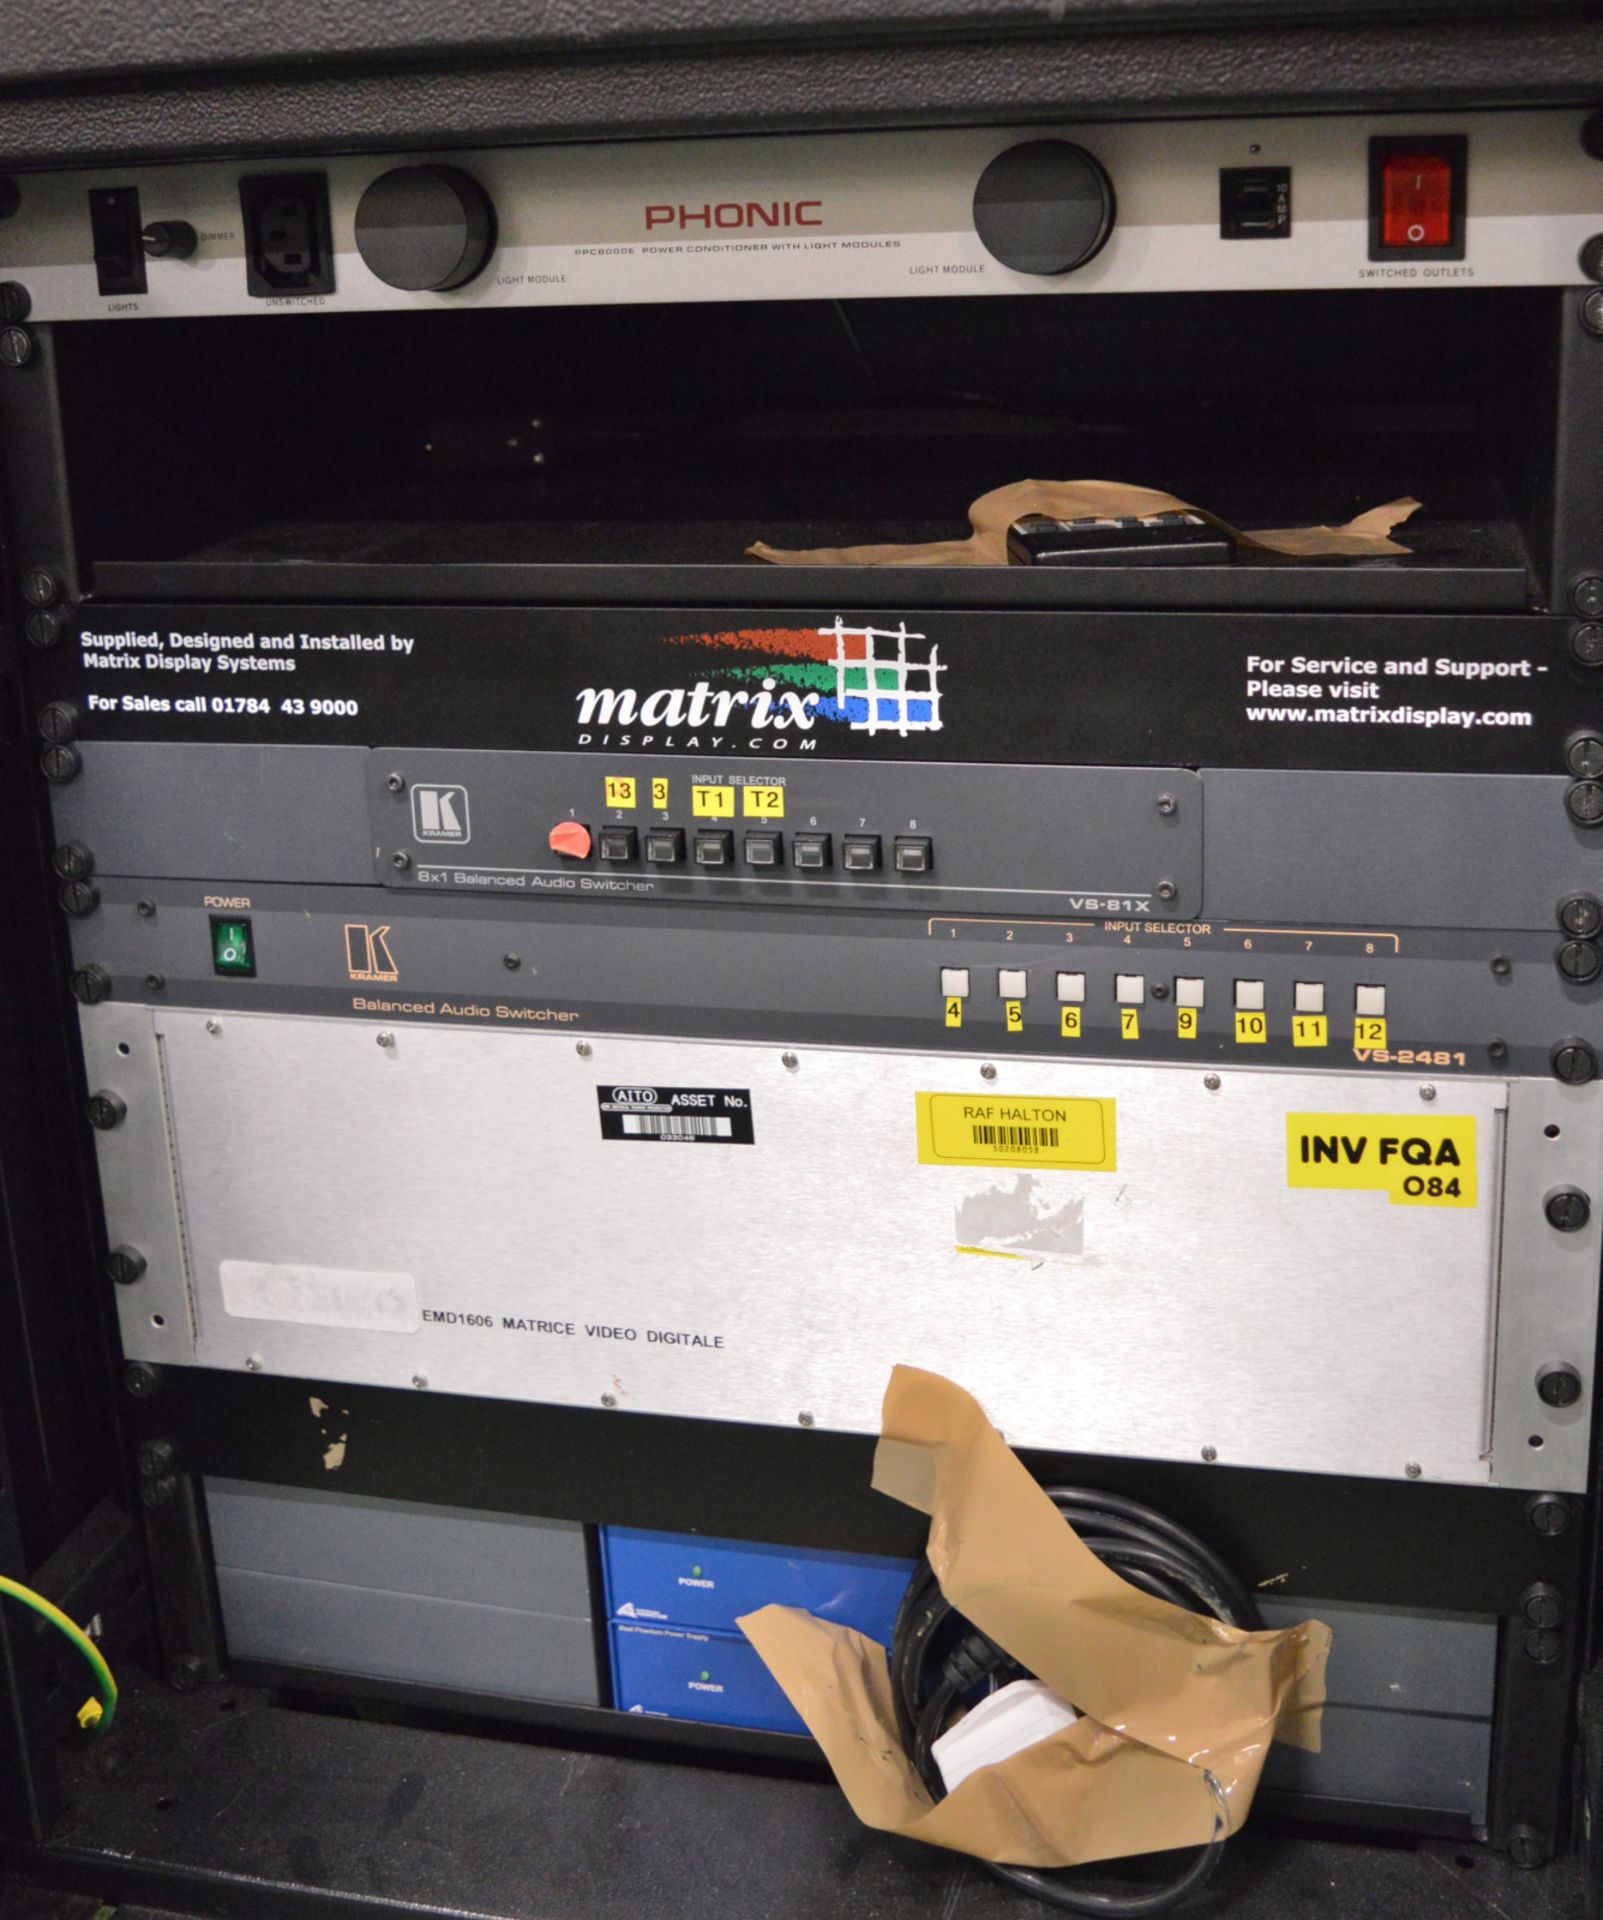 Matrix Display System in Portable 19" Equipment Rack. - Image 2 of 2